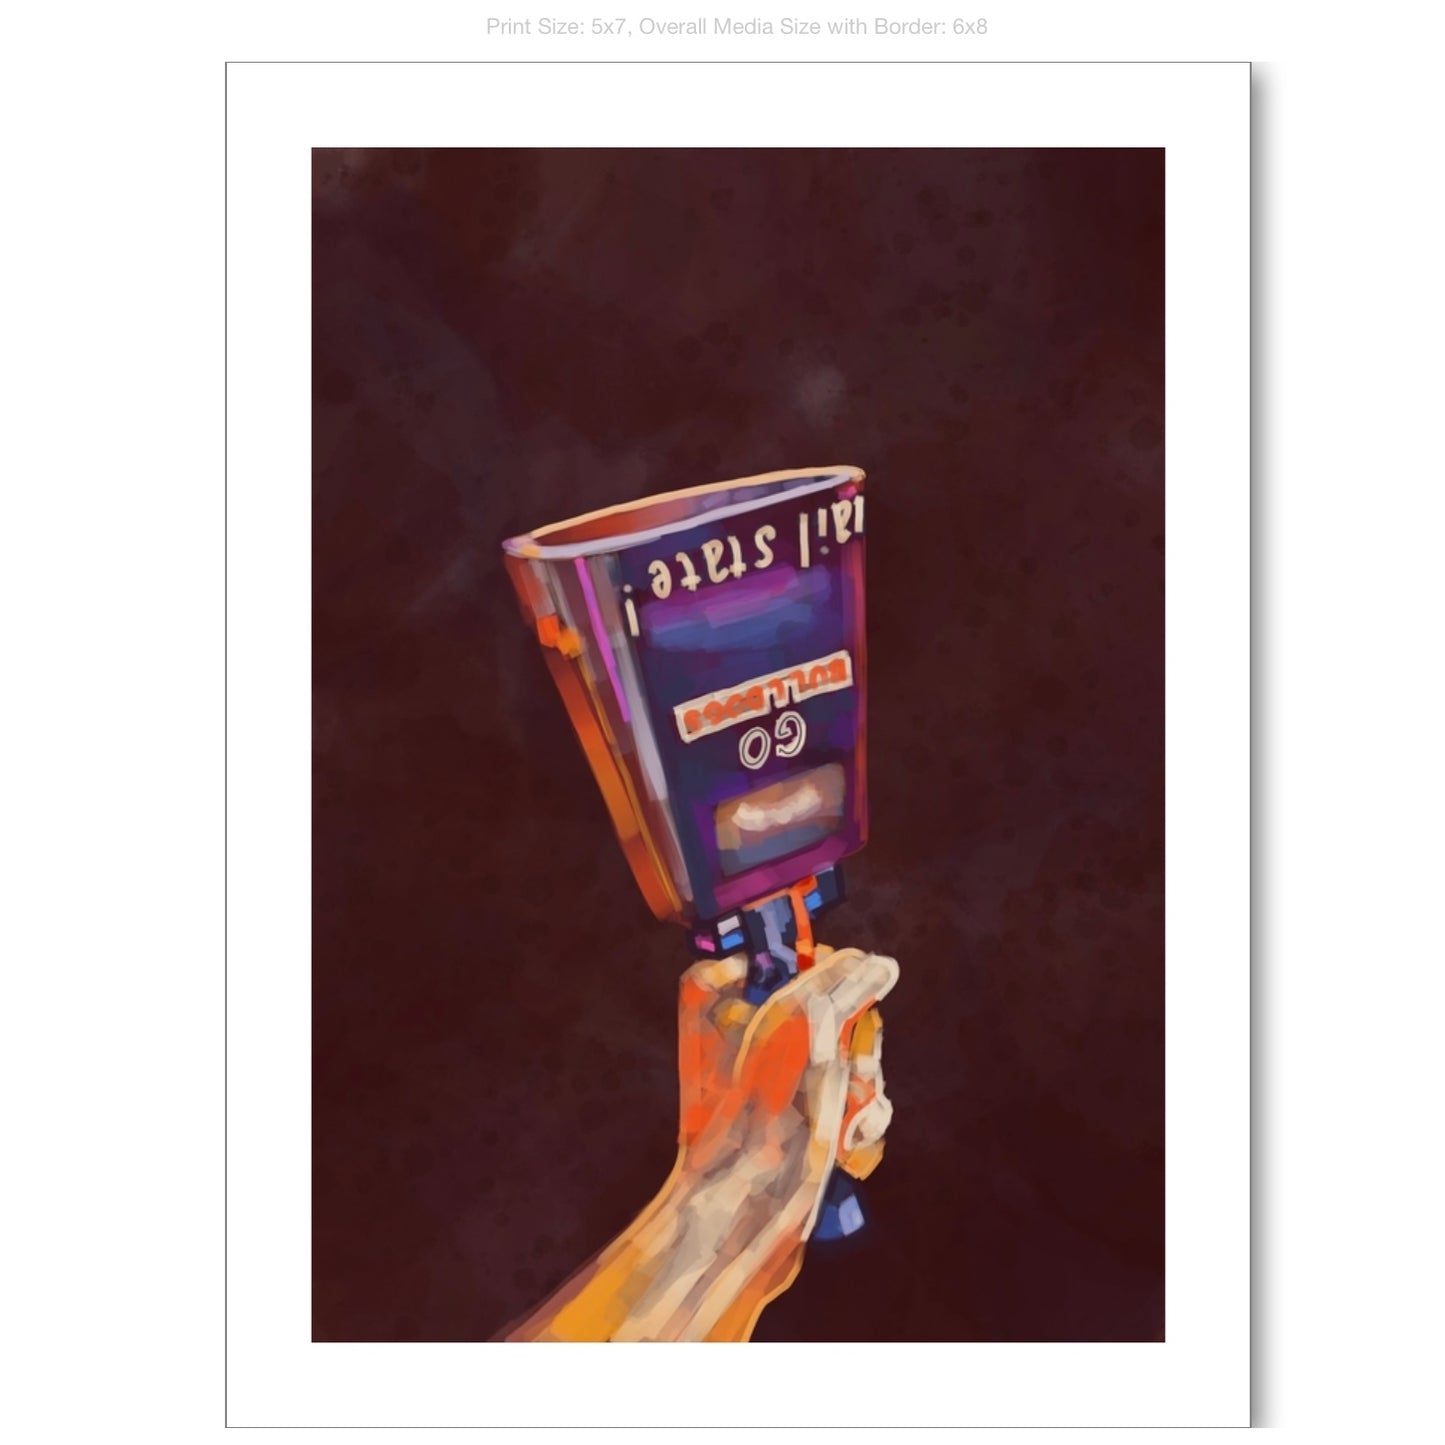 More Cowbell Giclee on Premium Heavyweight Paper